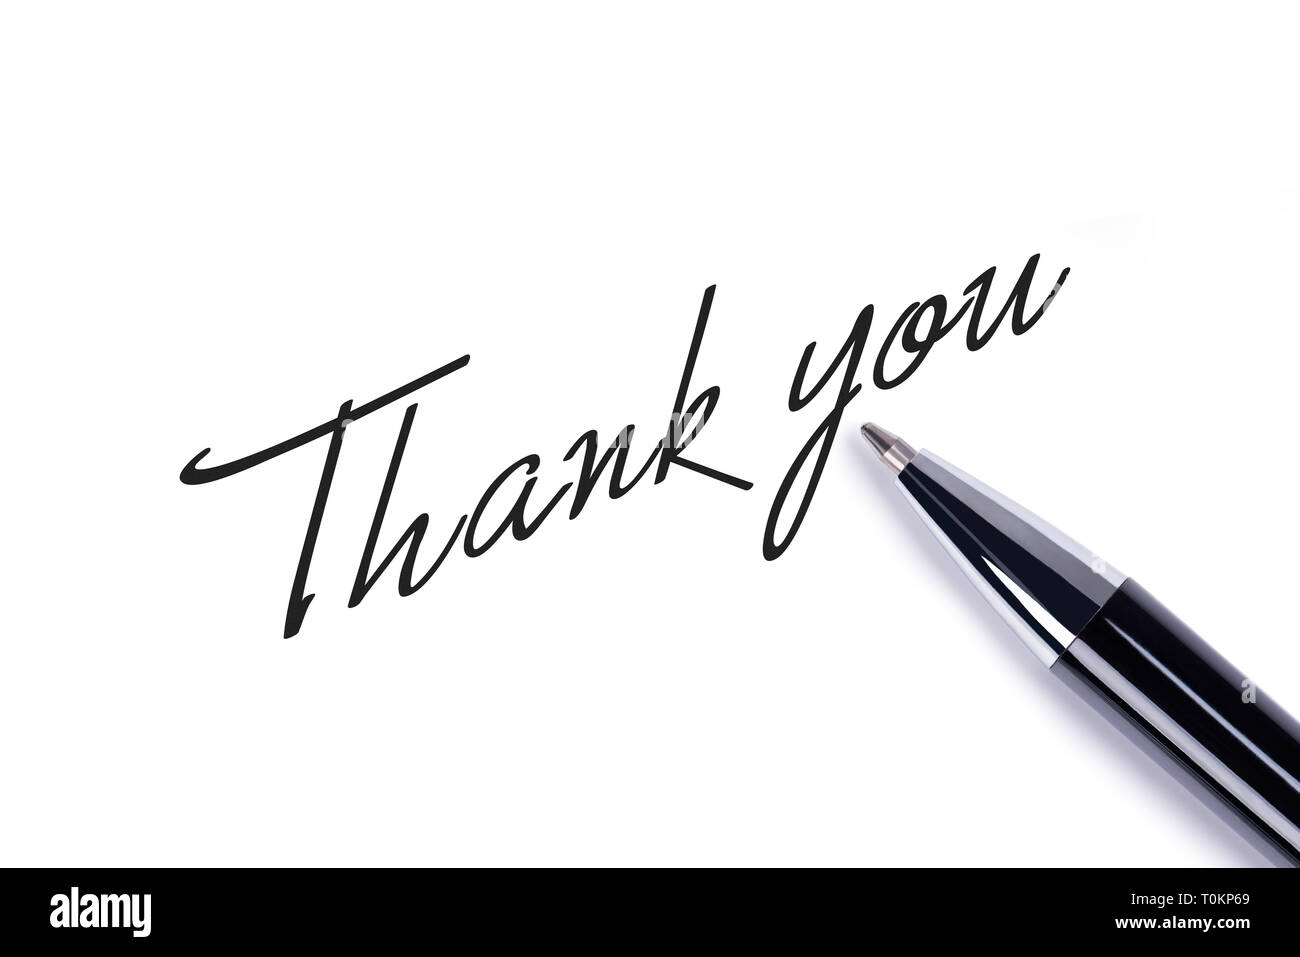 Thank you note on white background Stock Photo